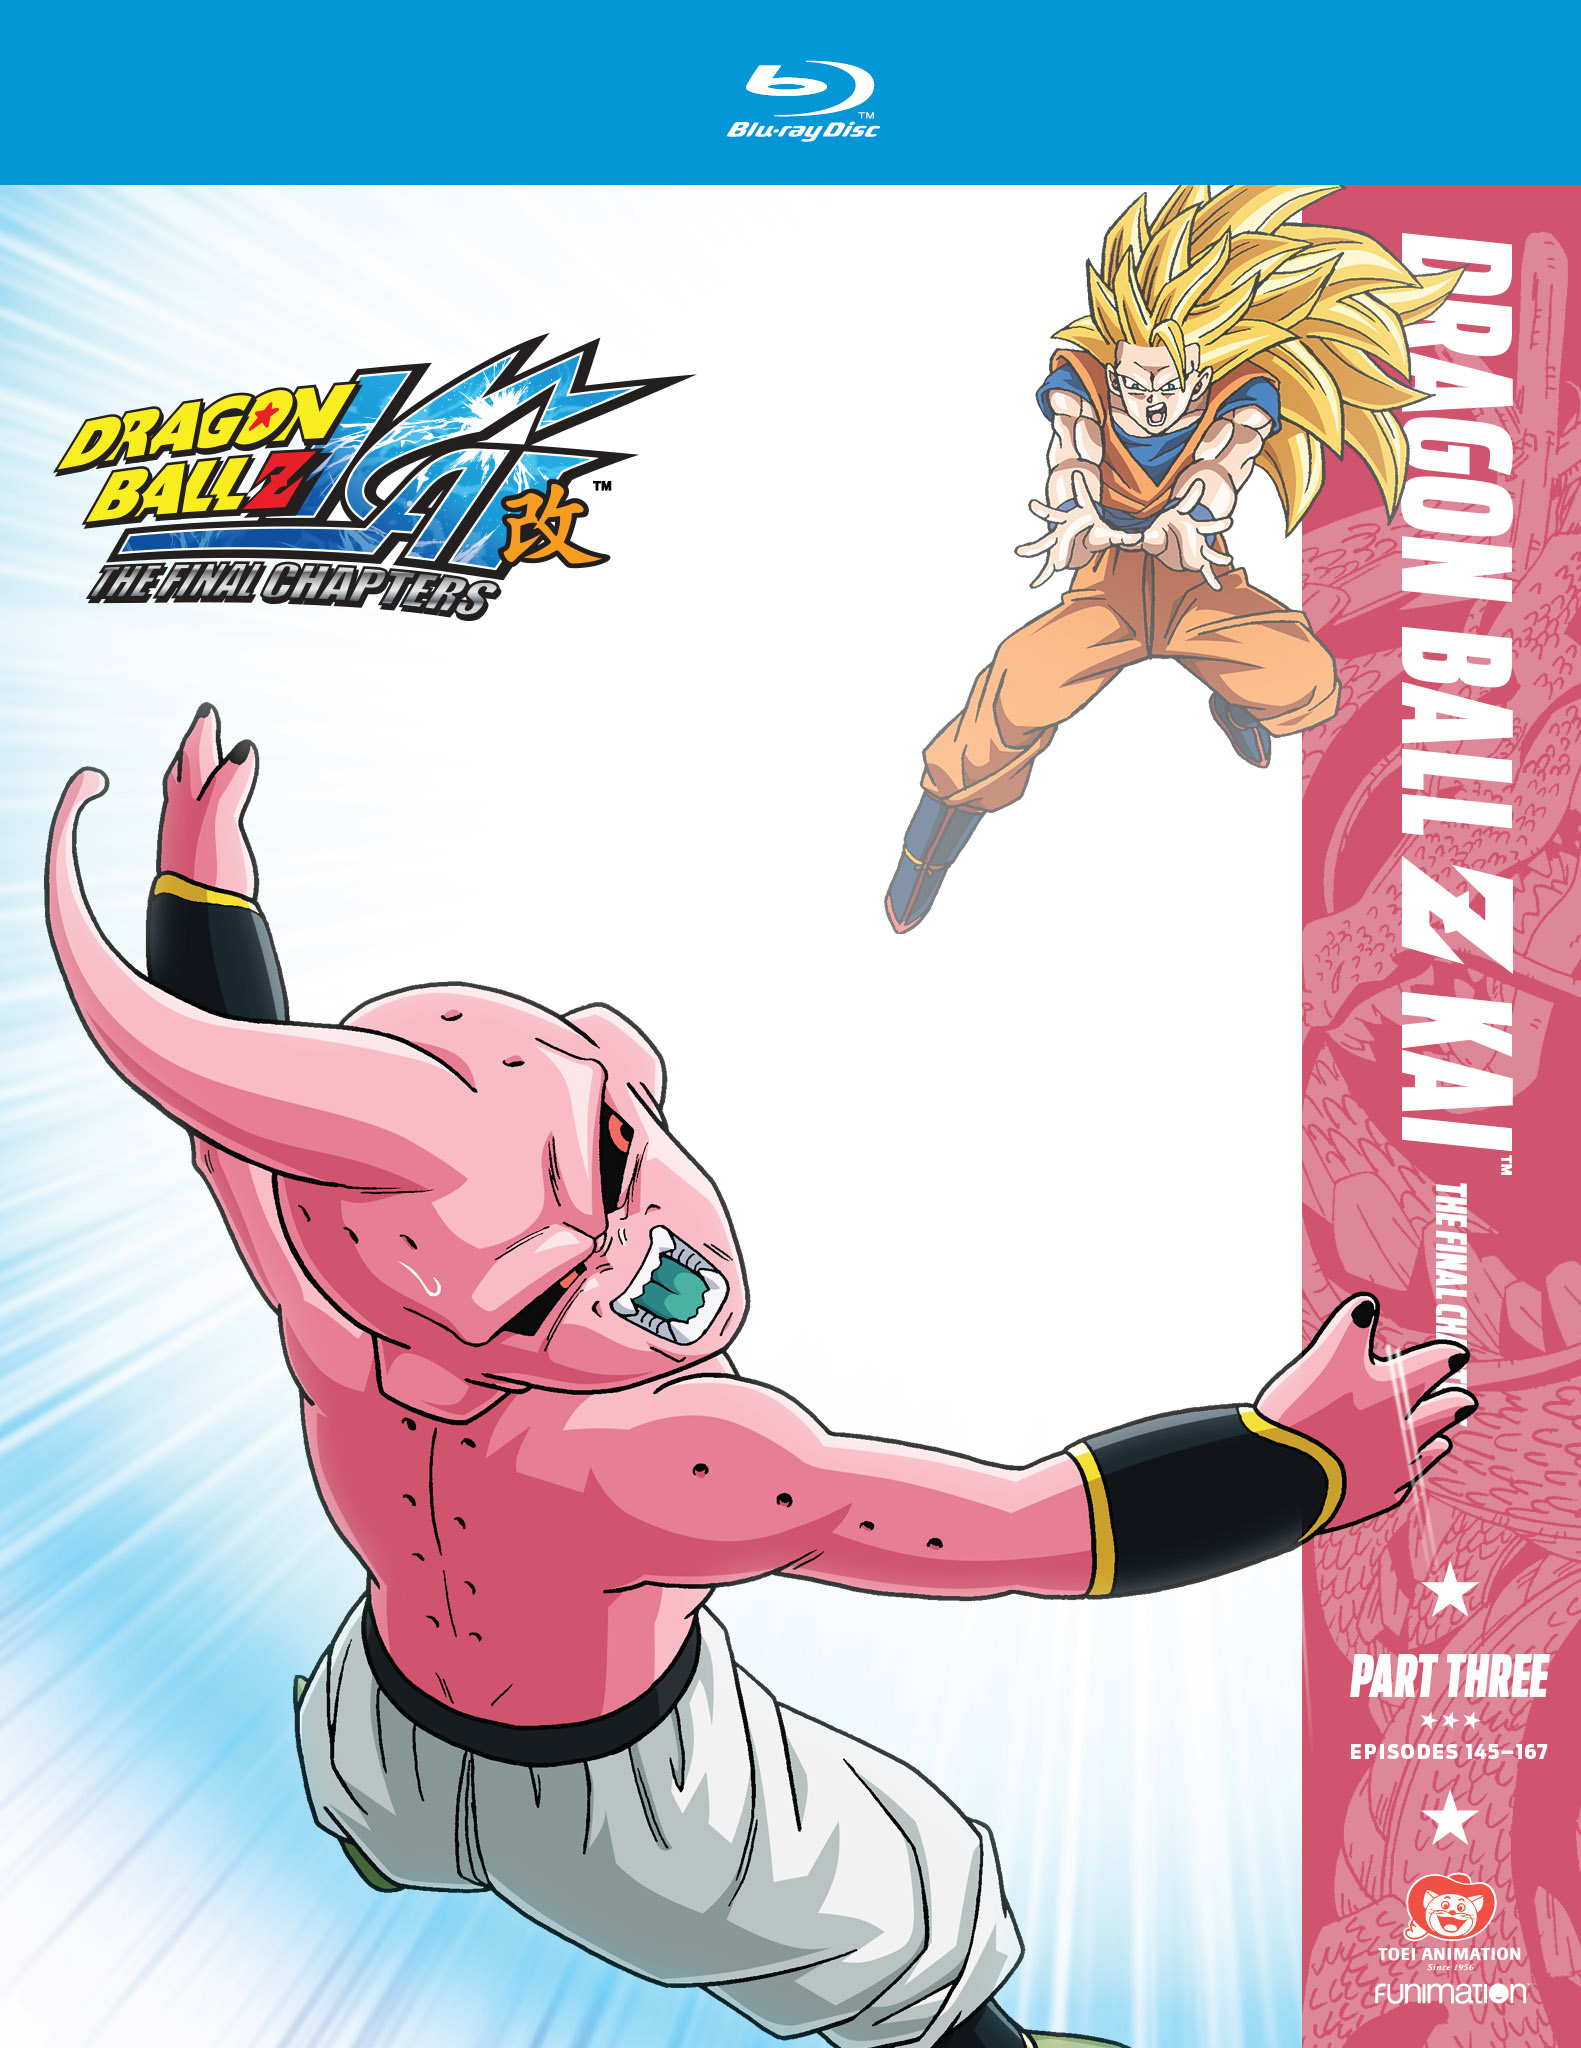 Dragon Ball Z Kai The Final Chapters Part Three Blu Ray Best Buy